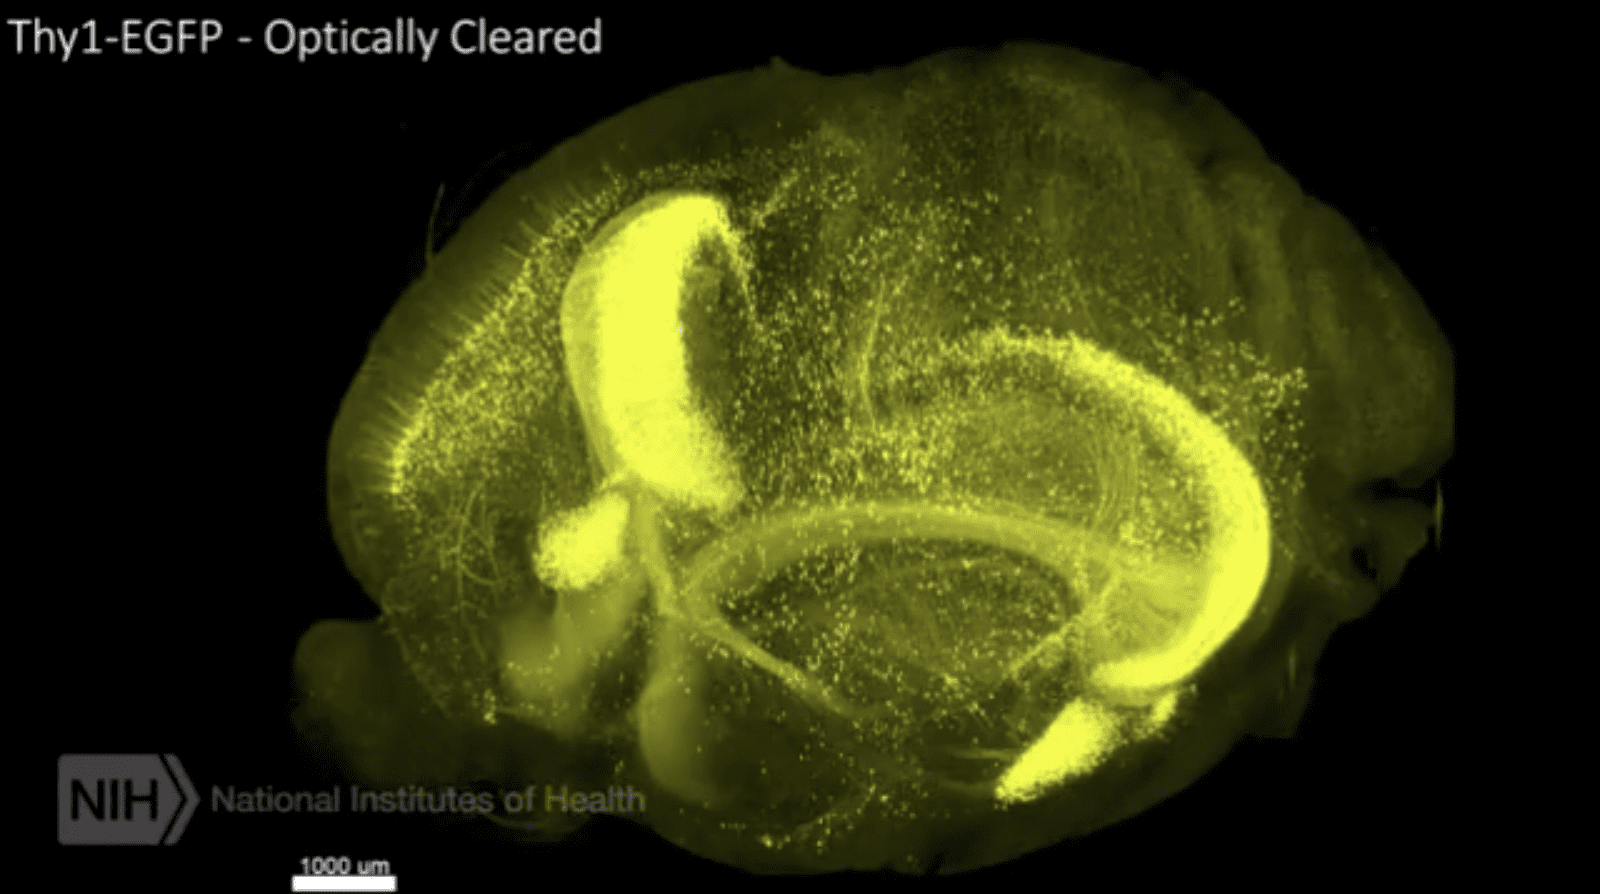 Video of Neurons in motion